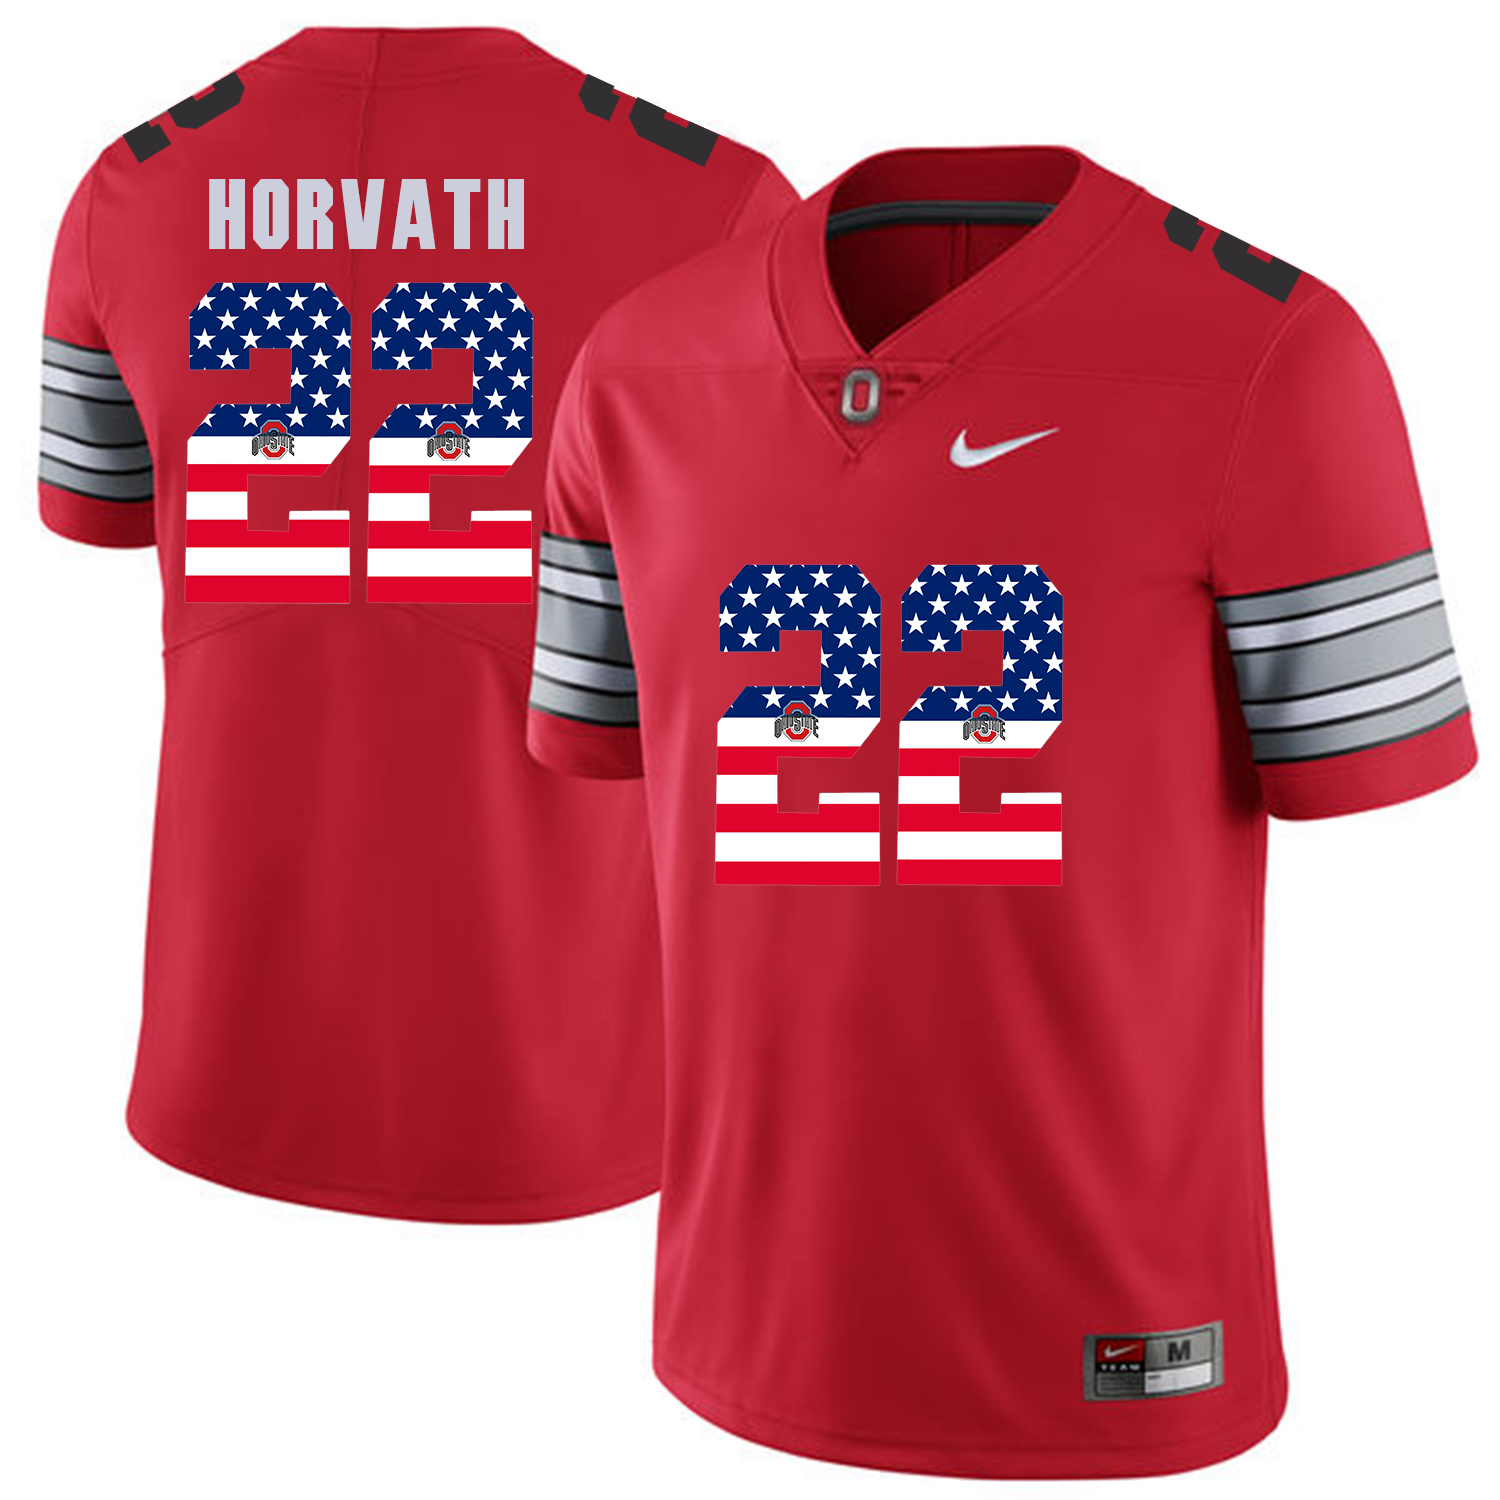 Men Ohio State 22 Horvath Red Flag Customized NCAA Jerseys